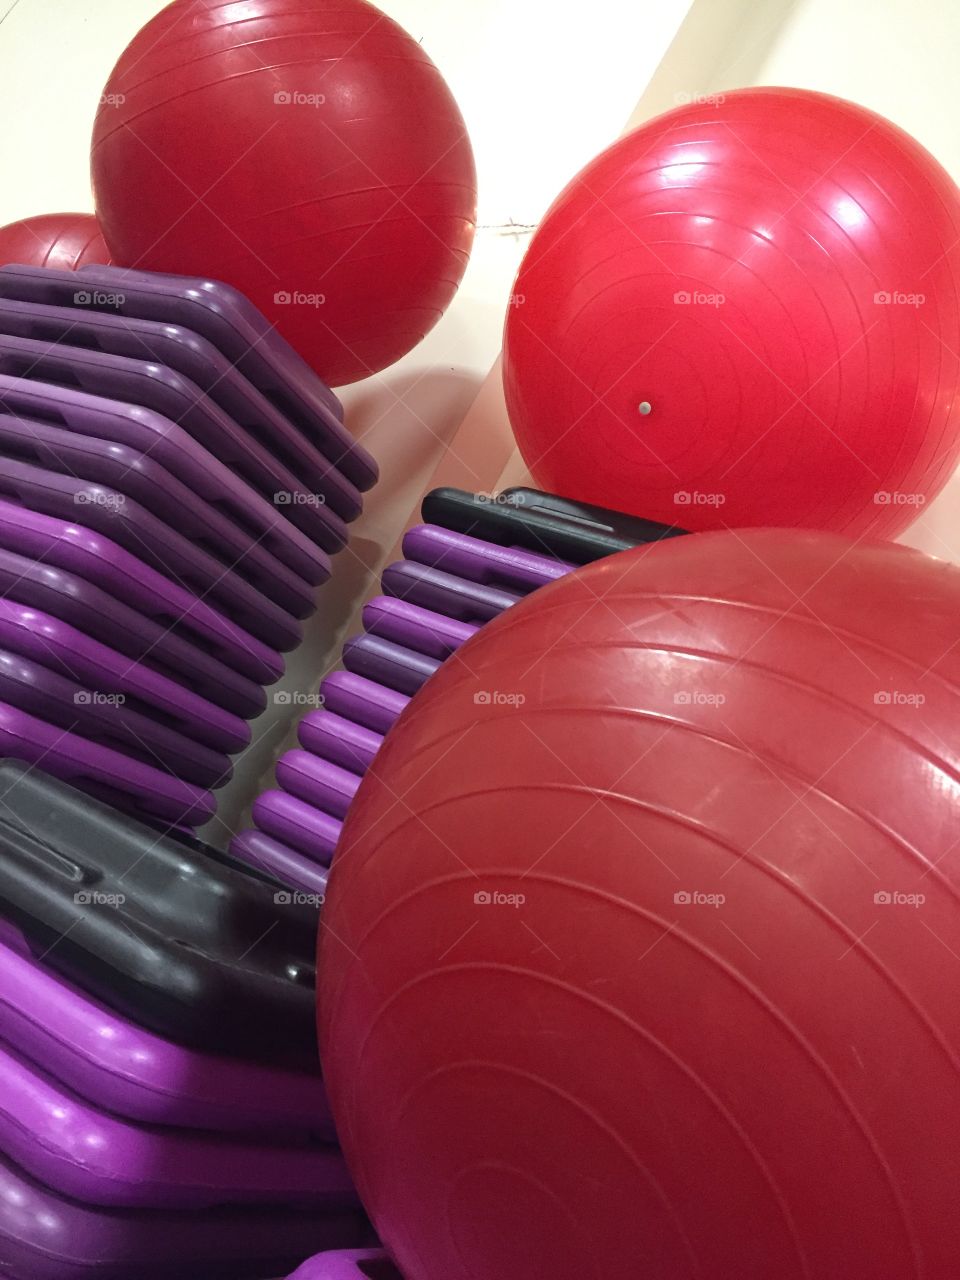 Exercise balls! What else is there to say? Gym time!